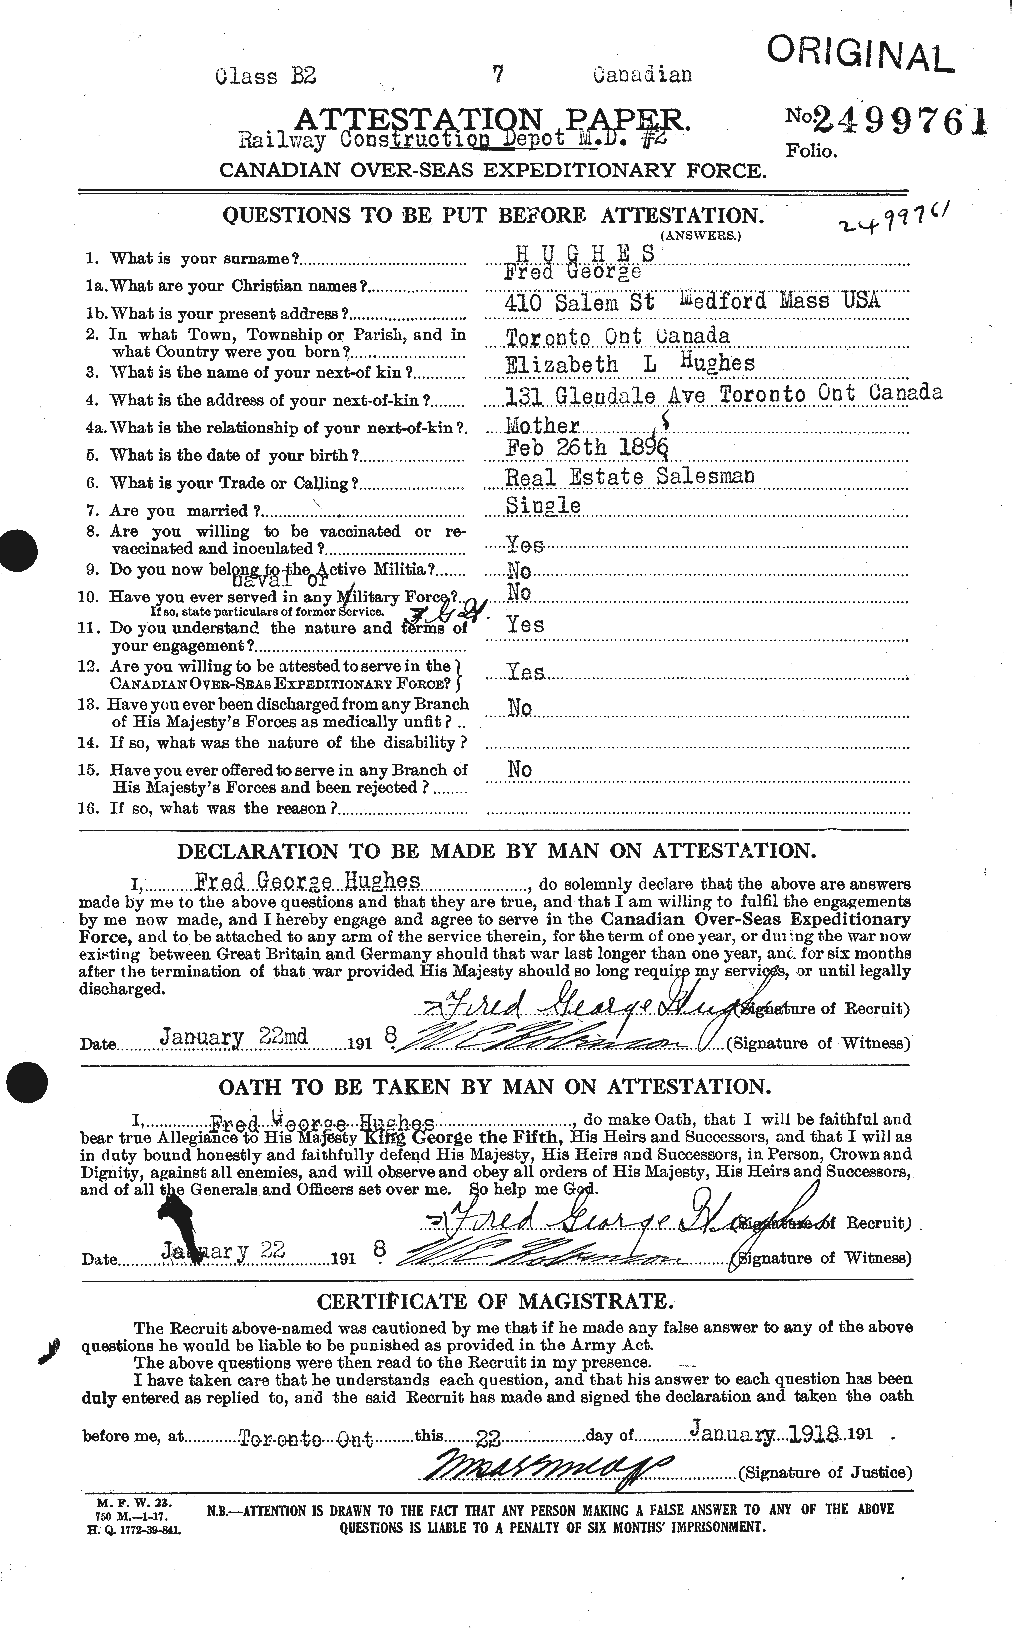 Personnel Records of the First World War - CEF 403786a